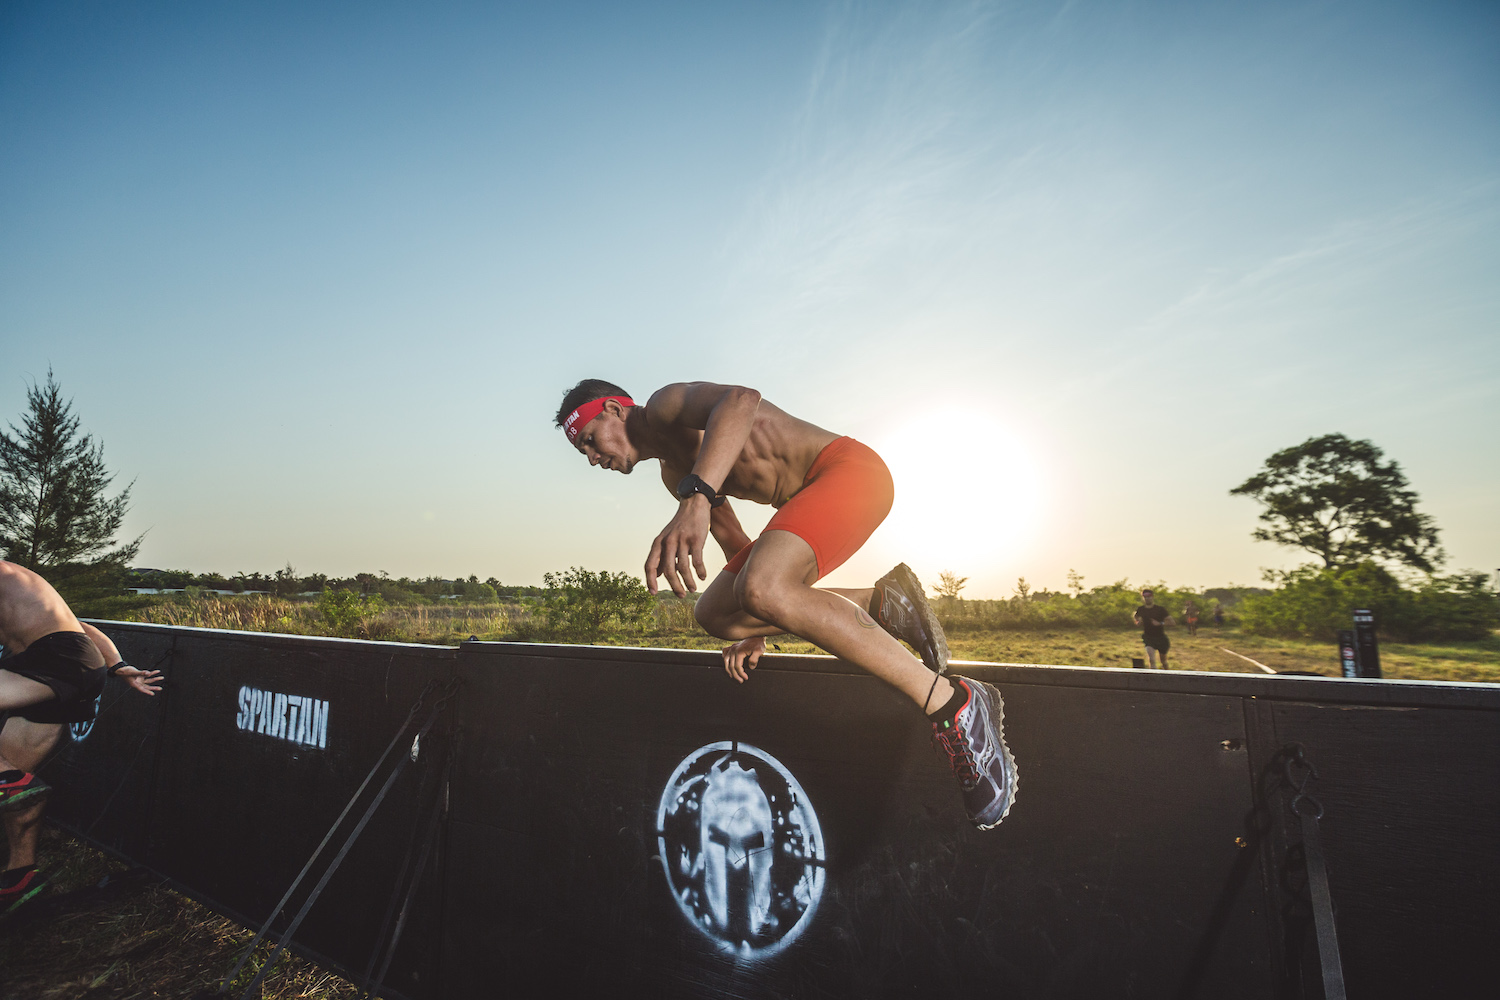 See What Spartan Race Has To Offer Obstacle Course Trail